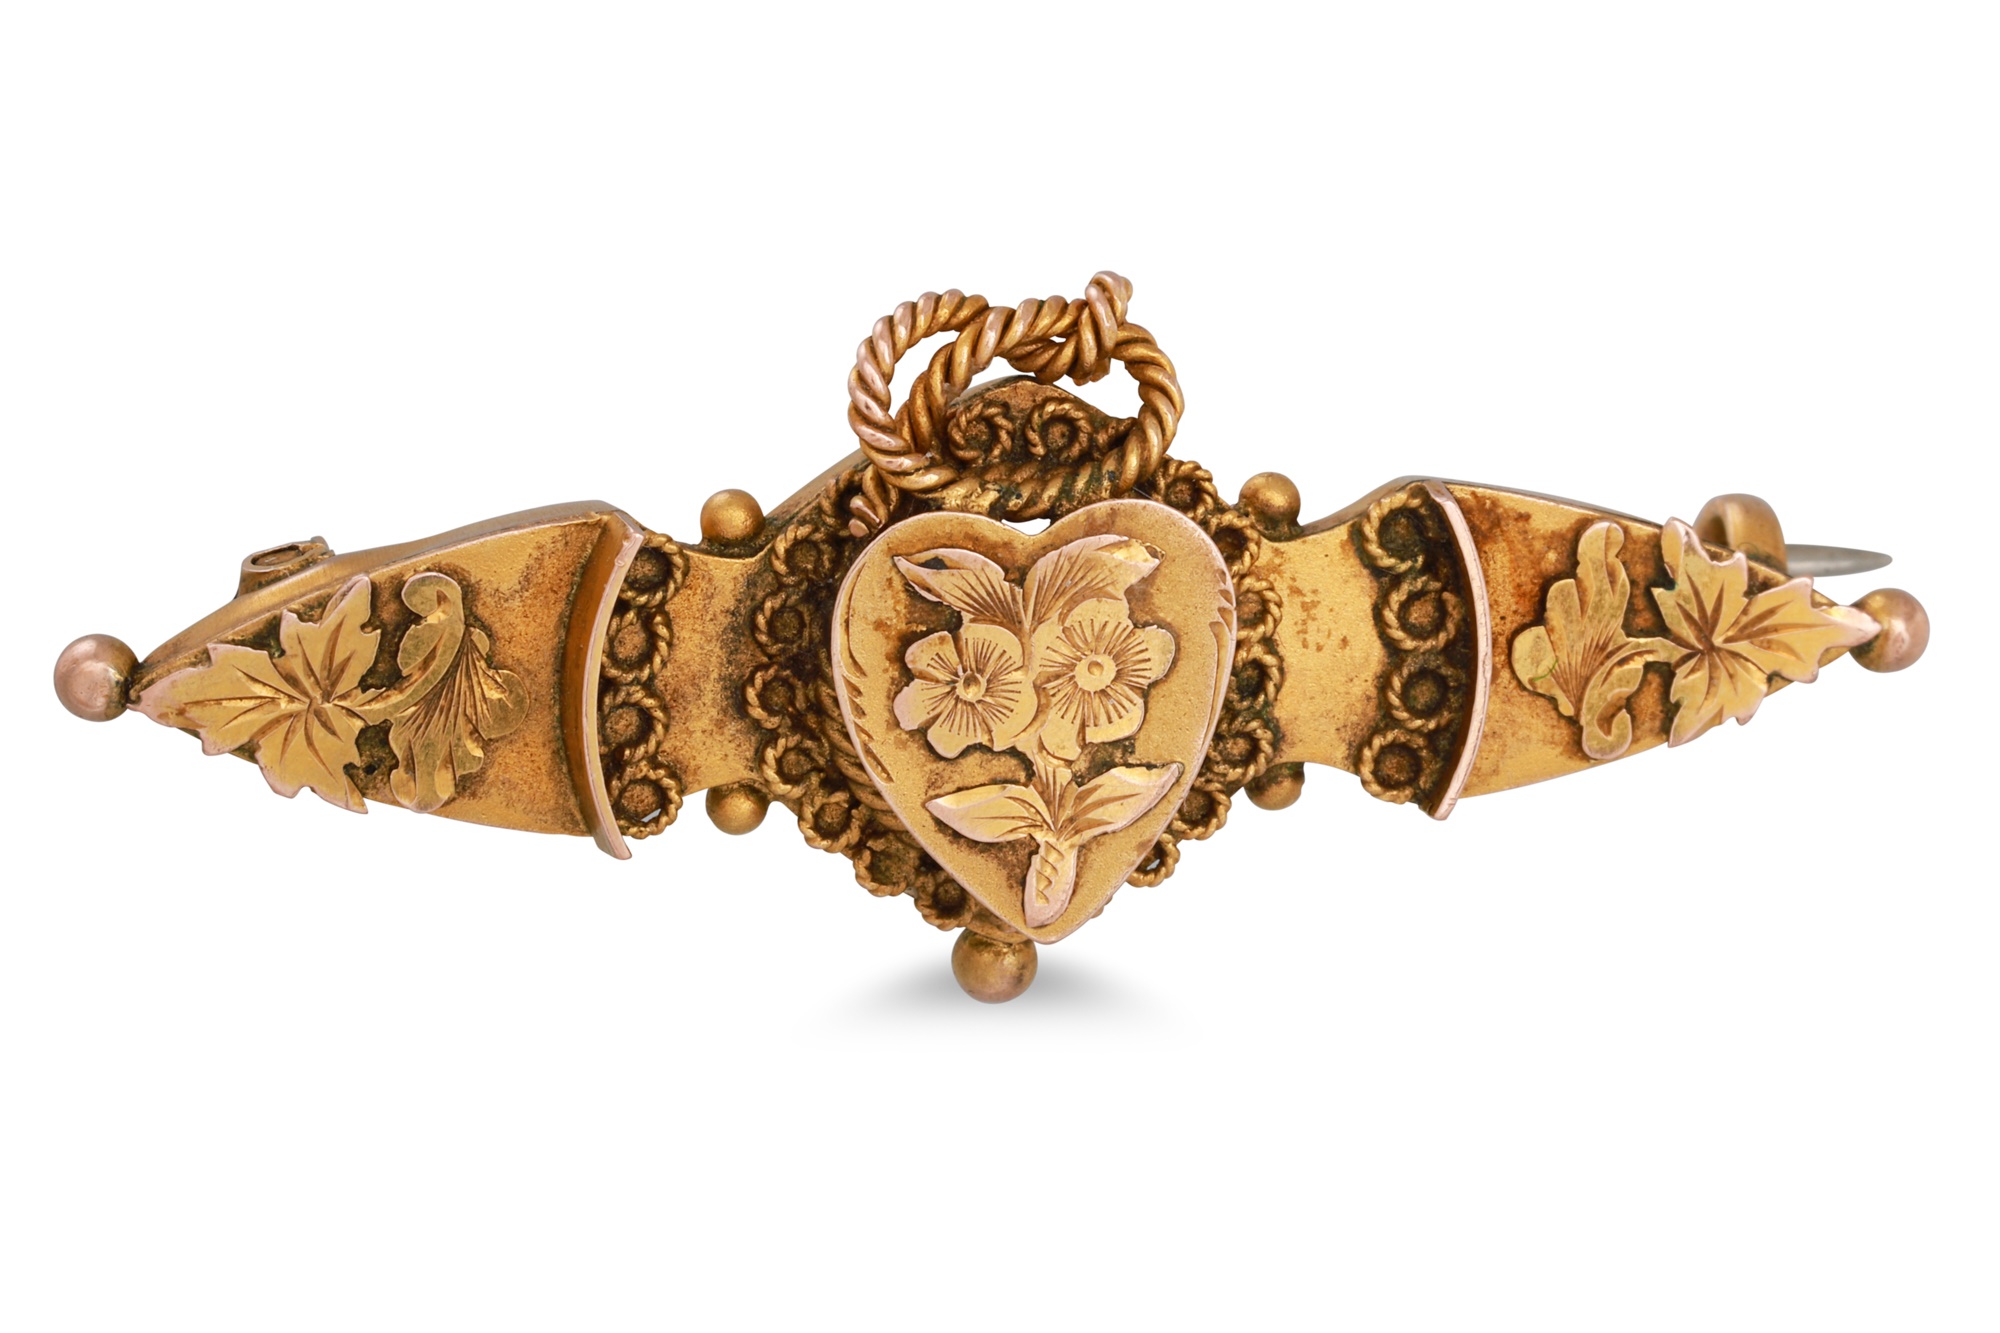 The history of the heart-shaped motif